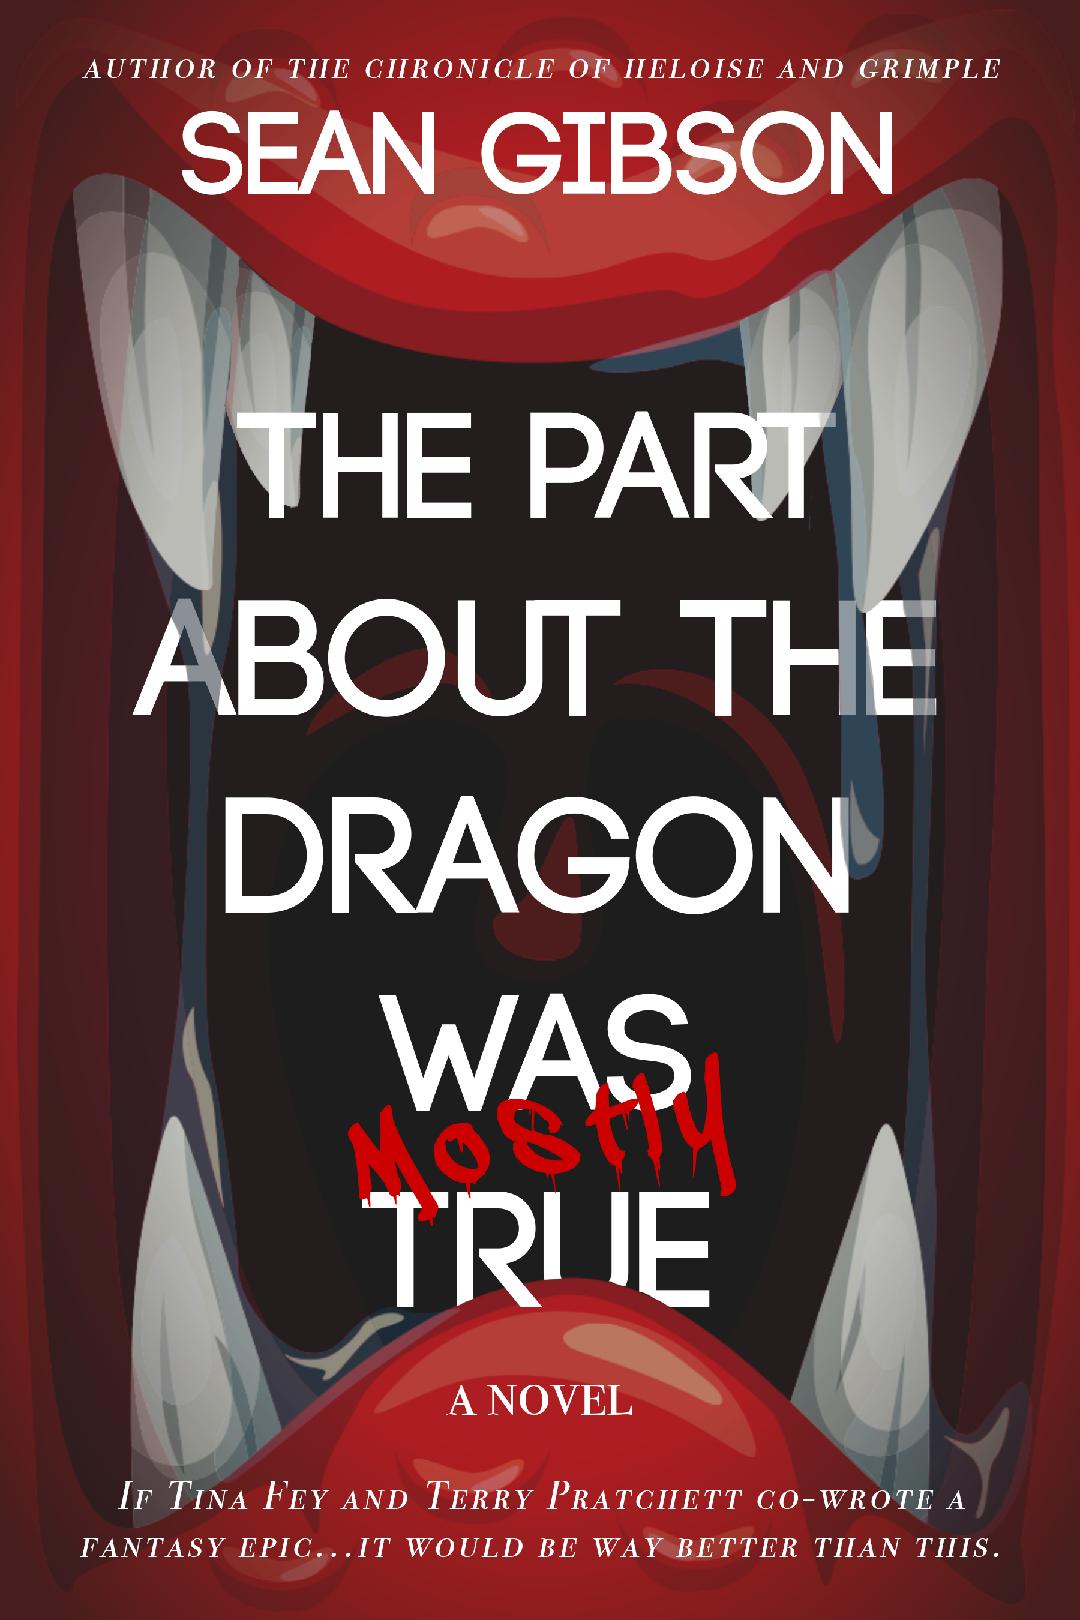 The Part About the Dragon Was (Mostly) True by Sean Gibson